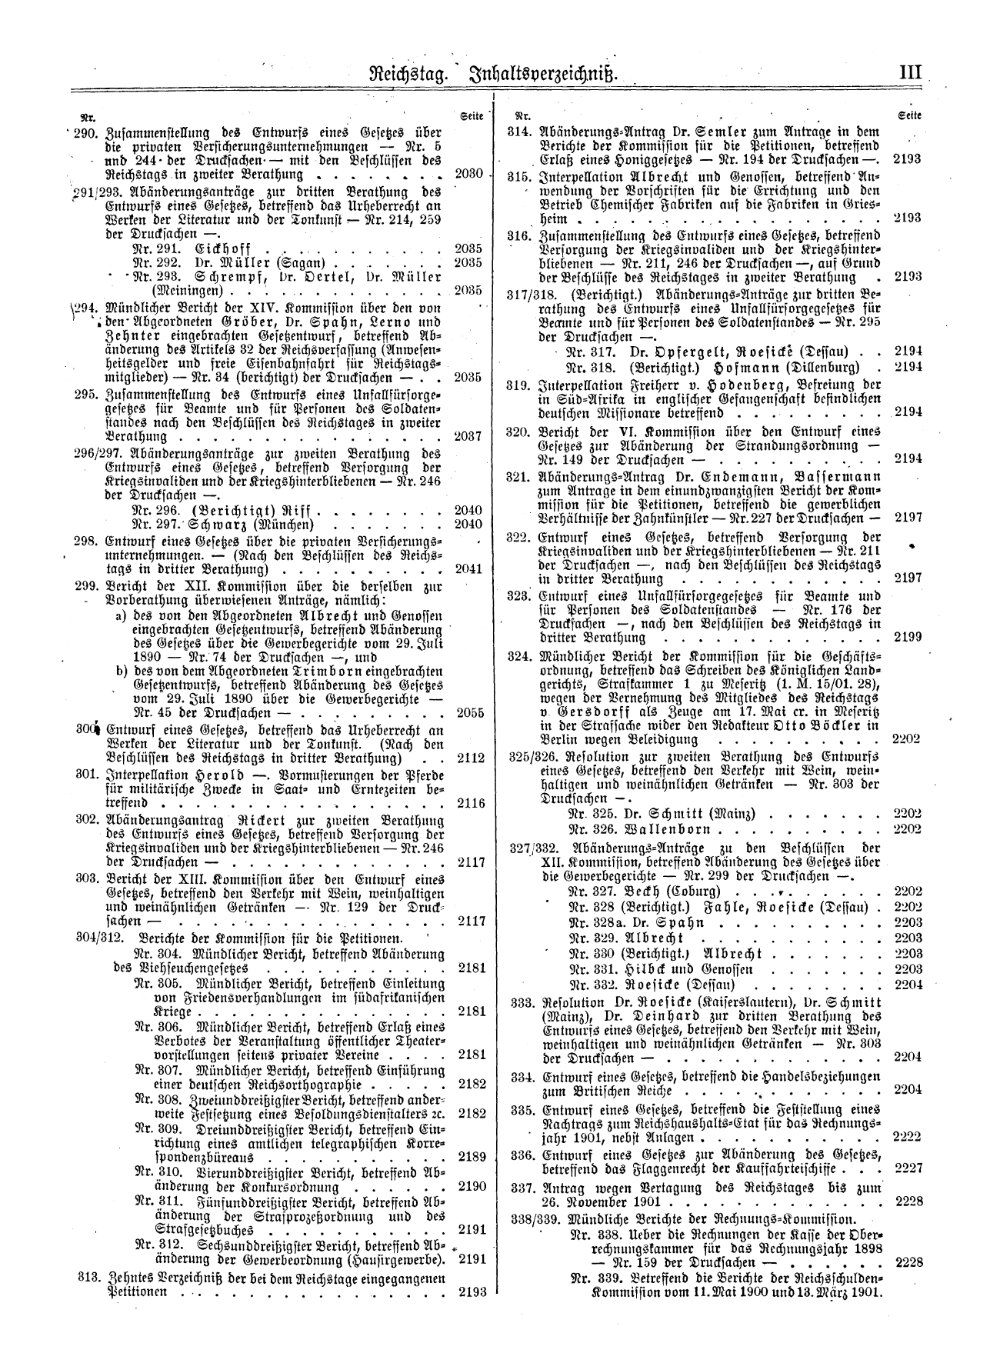 Scan of page III